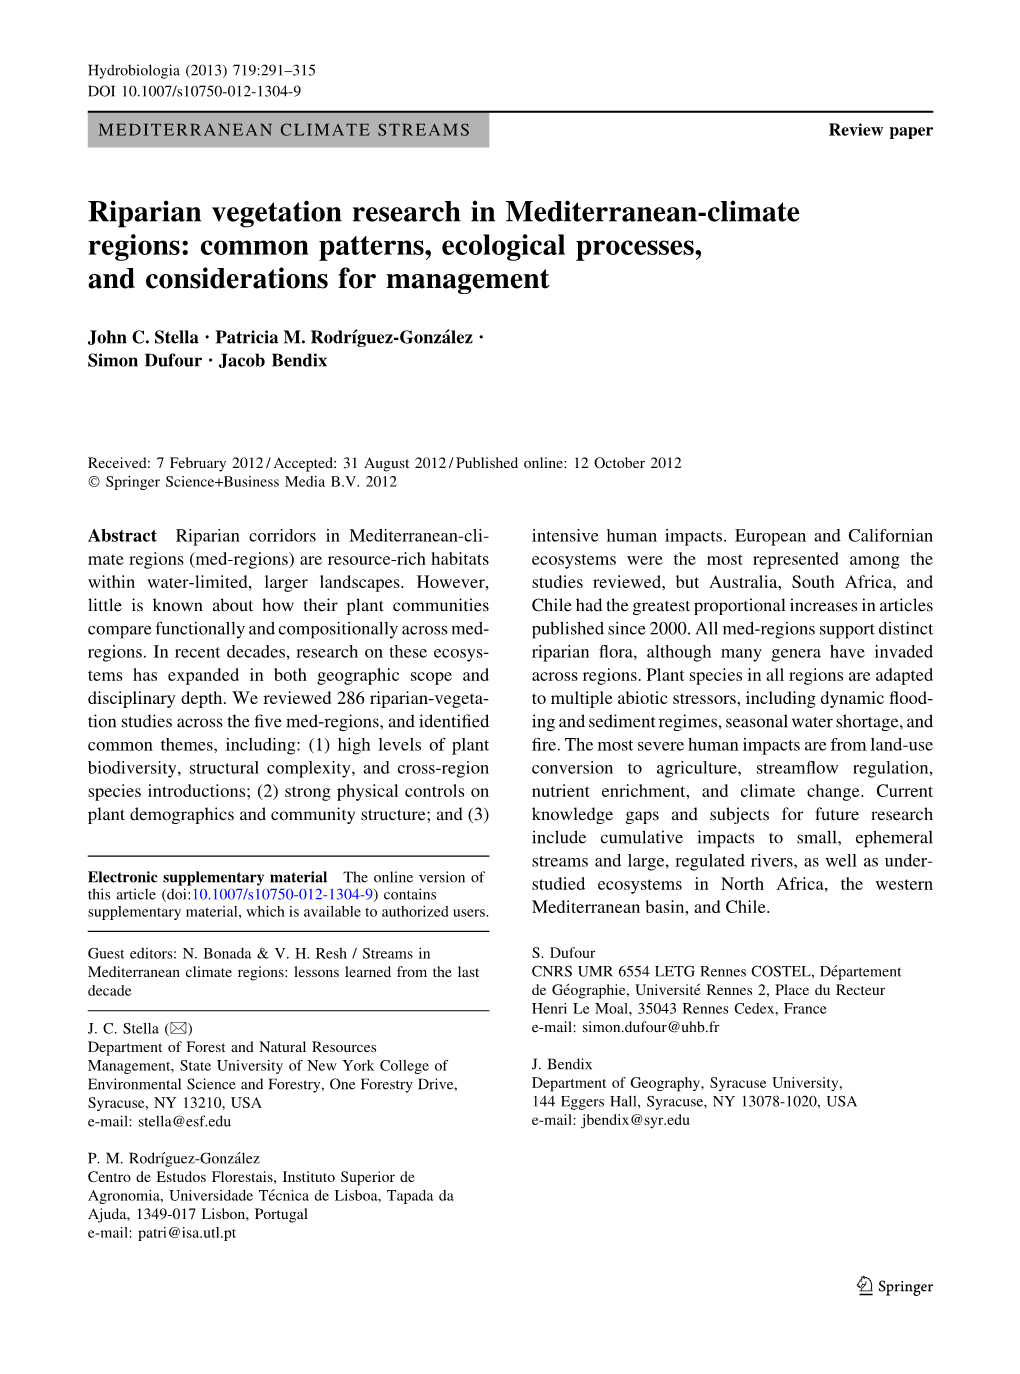 Riparian Vegetation Research in Mediterranean-Climate Regions: Common Patterns, Ecological Processes, and Considerations for Management